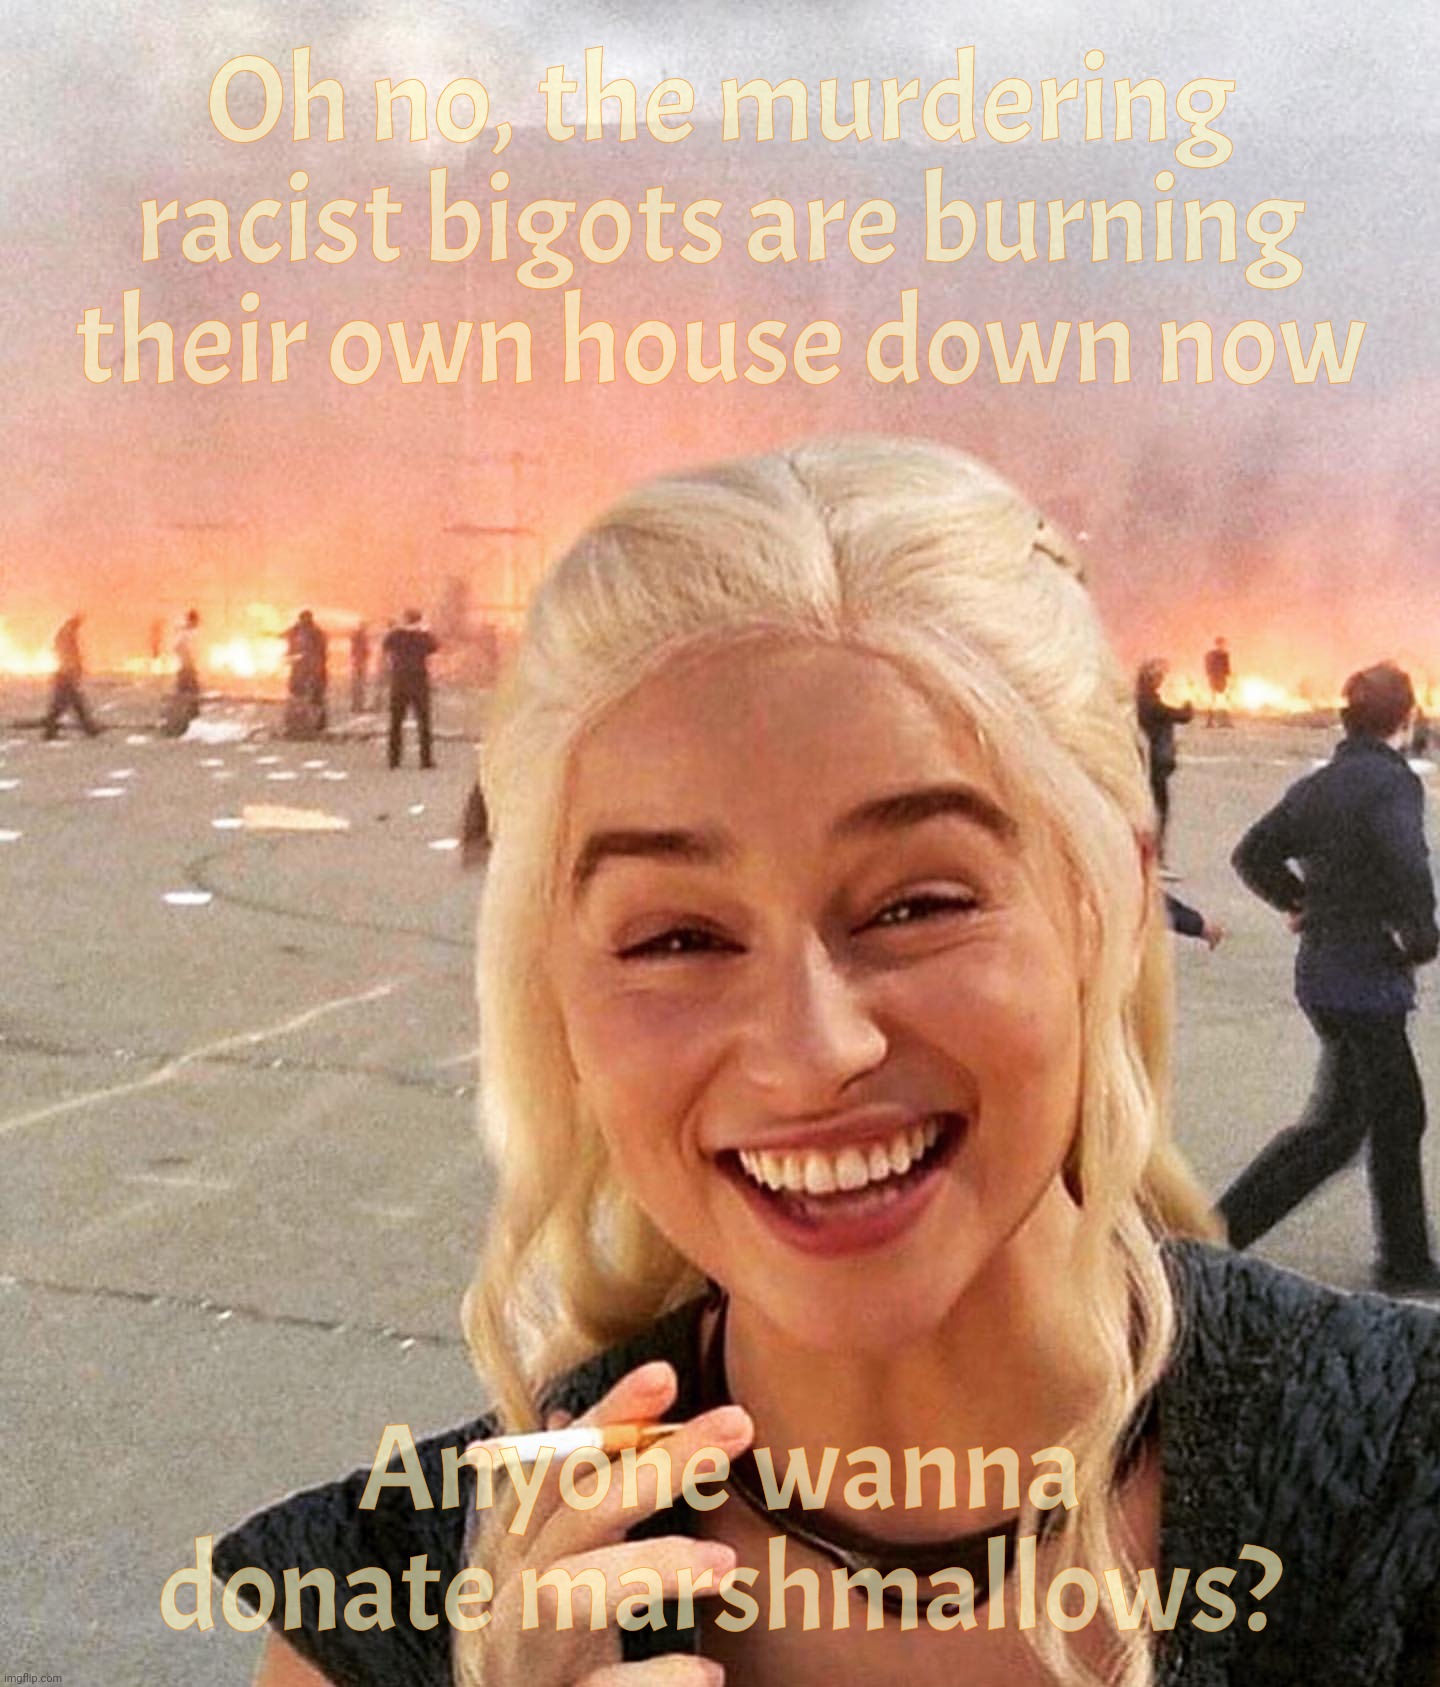 Self determination shall continue onwards  whether we want them to or not | Oh no, the murdering racist bigots are burning their own house down now; Anyone wanna donate marshmallows? | image tagged in disaster smoker girl,sudan civil war,sudan,reap what they sew,see what i did there,toast them marshmallows | made w/ Imgflip meme maker